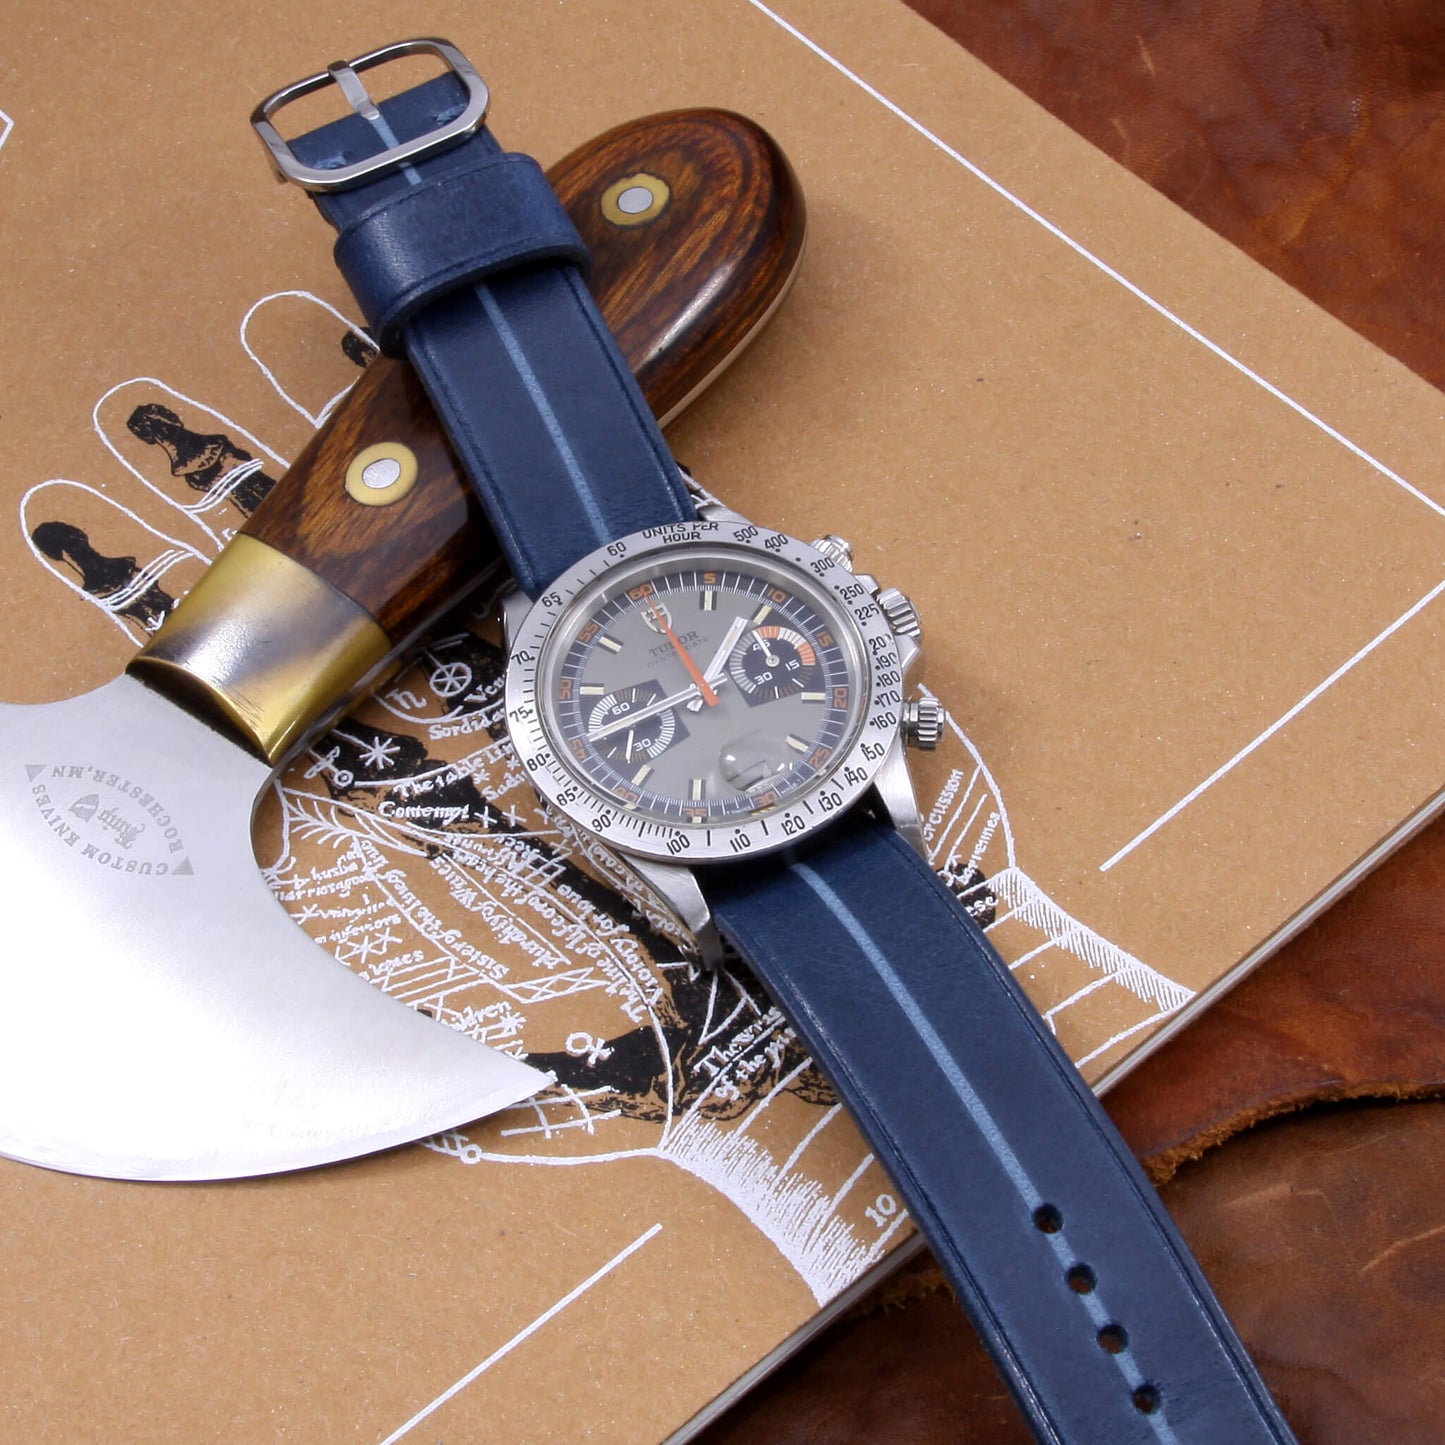 Upgrade Your Watch with a Garrison Sequoia 108 Single Pass Strap in Dark Blue Italian Veg-Tanned Leather by Cozy Handmade